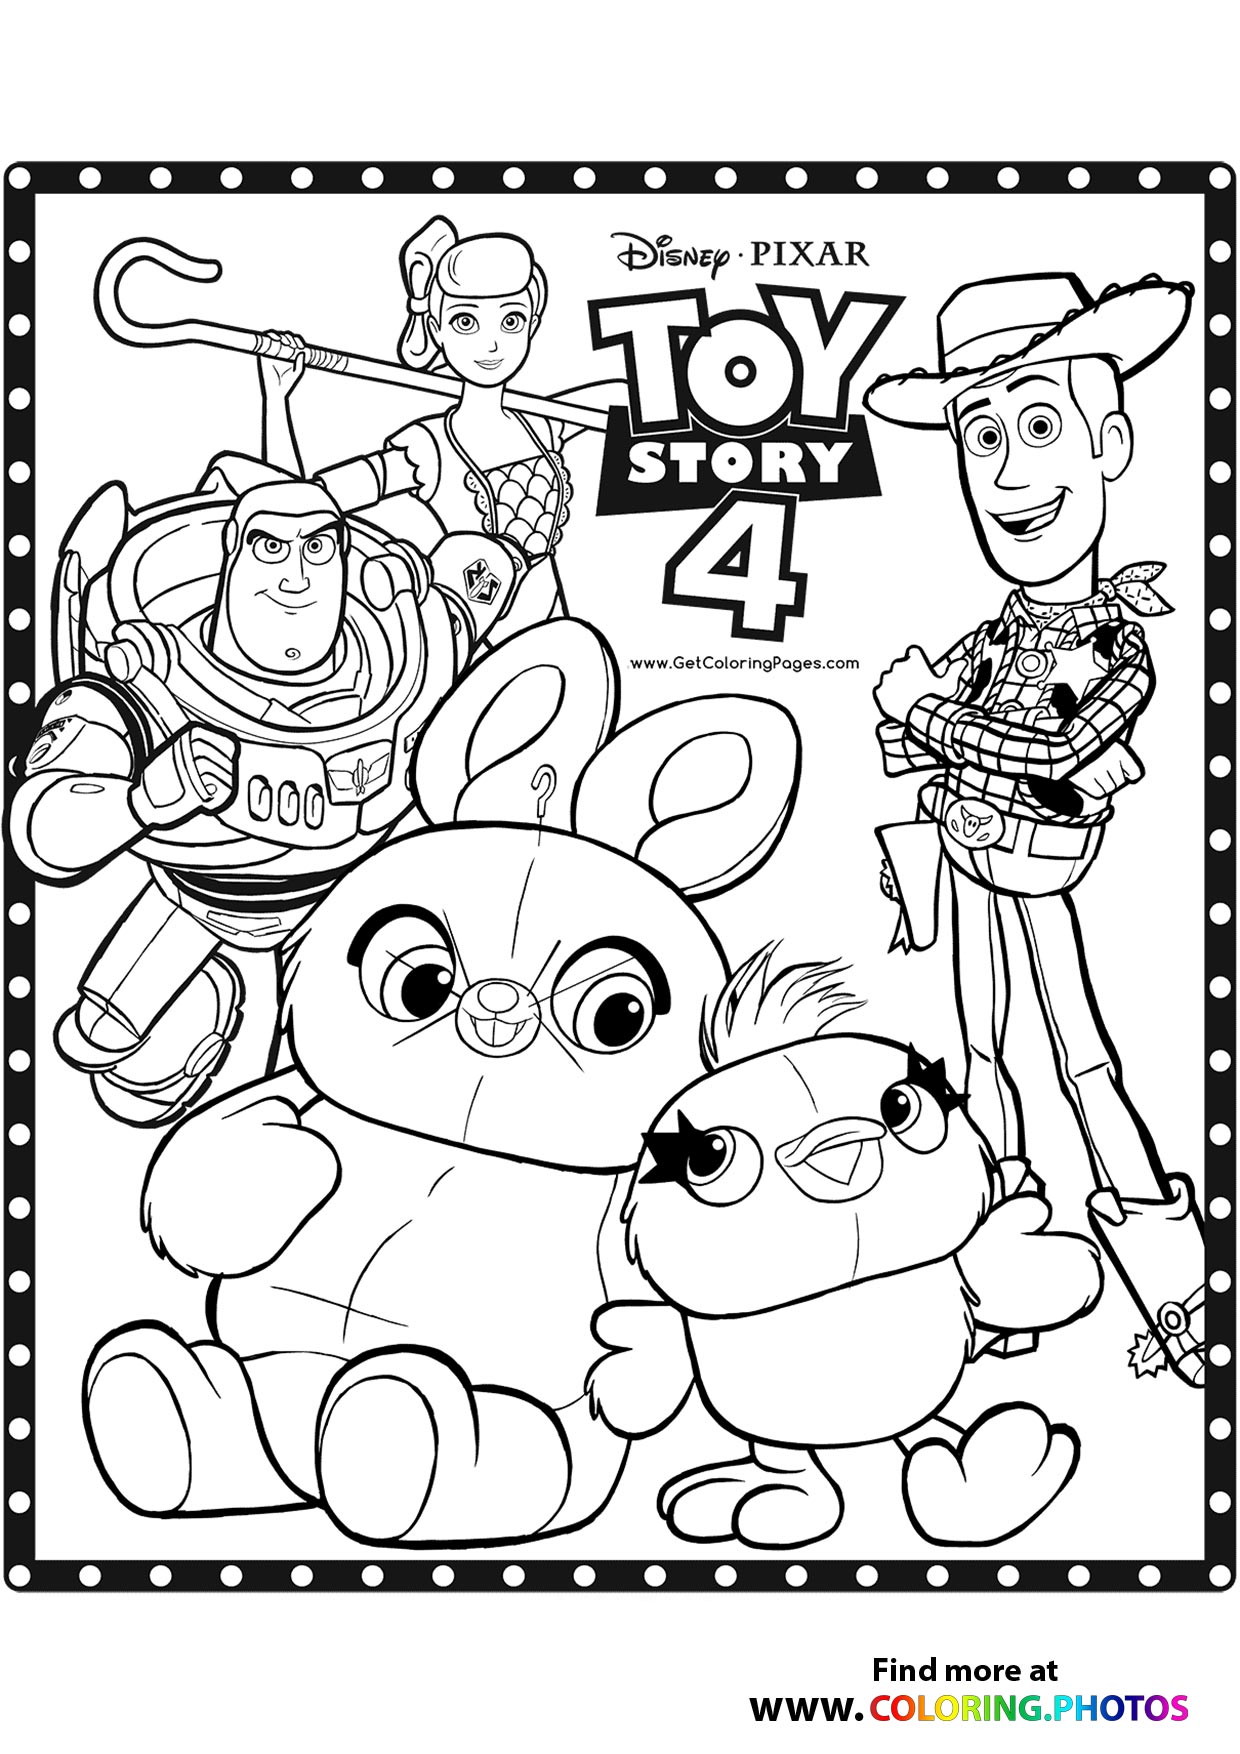 Disney Toy Story   Coloring Pages for kids   Free & Easy Print or ...